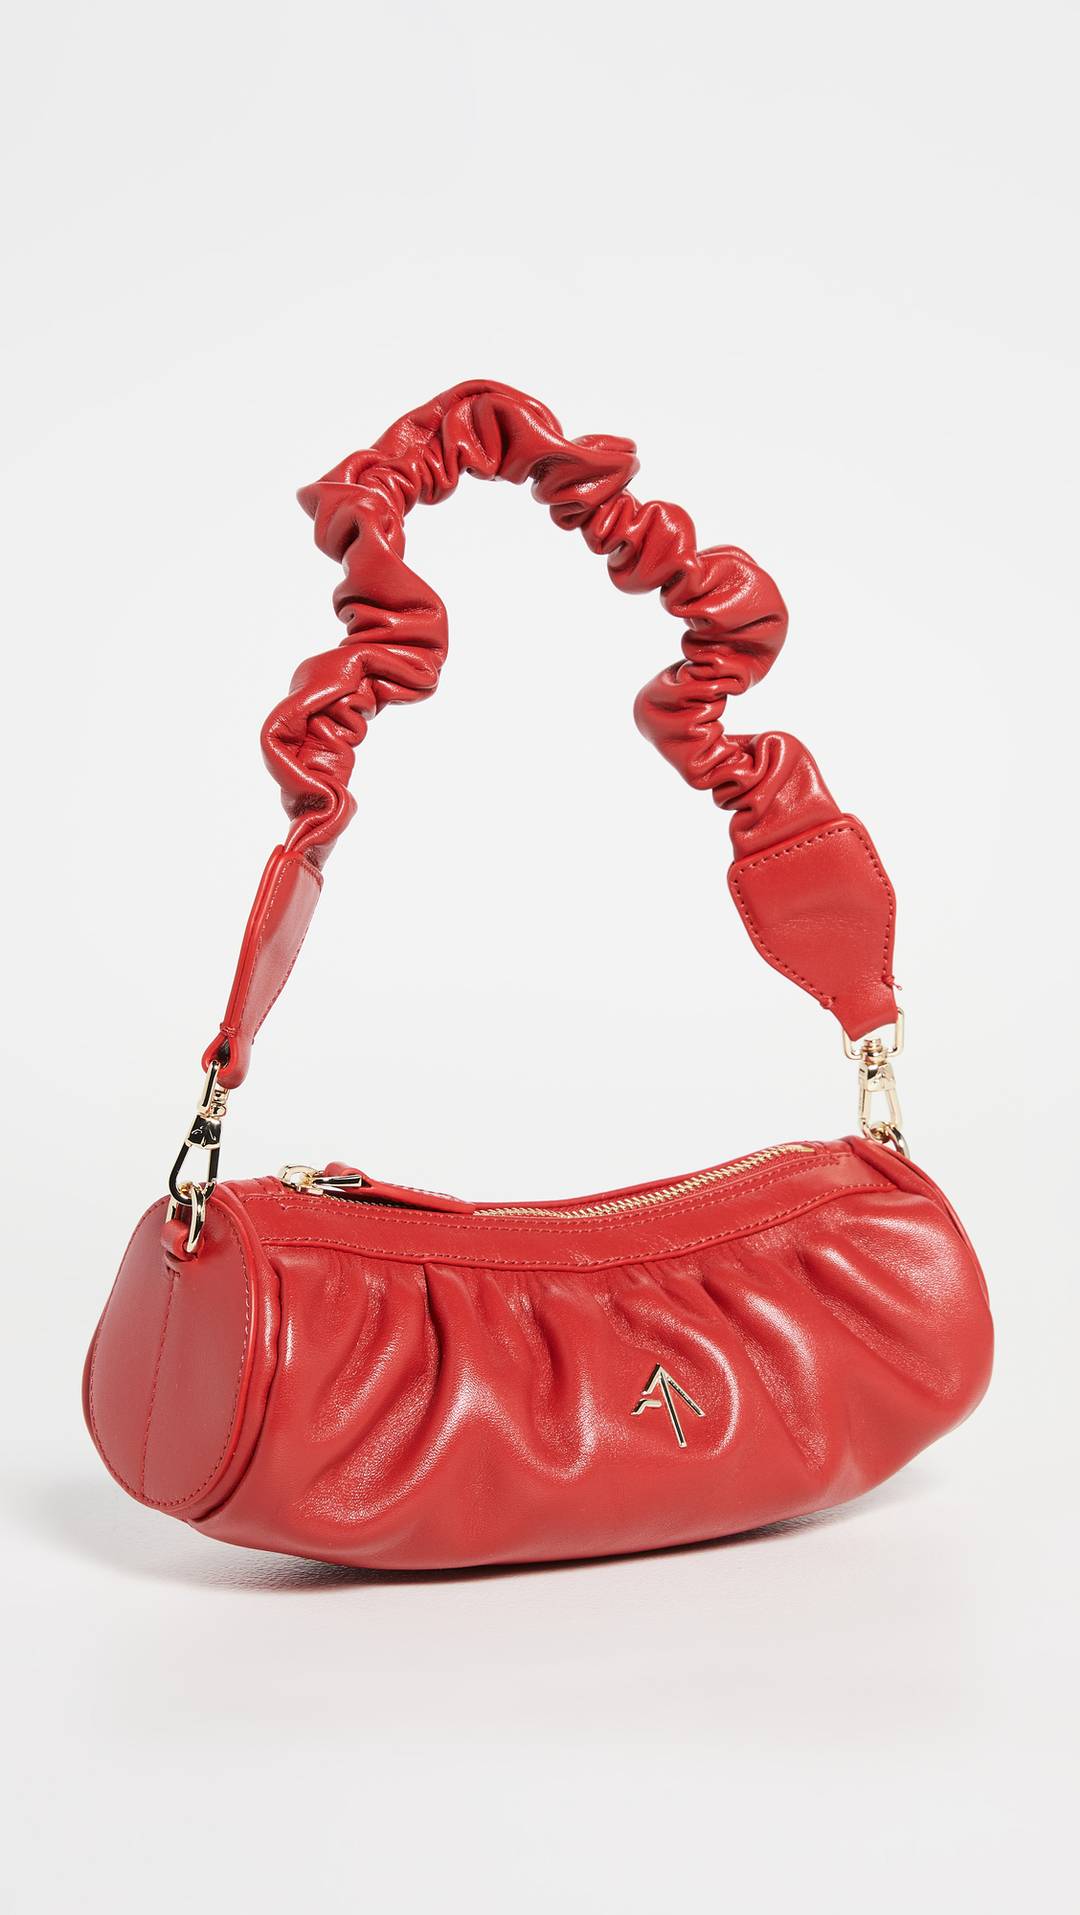 5 colors for handbag 3. Red